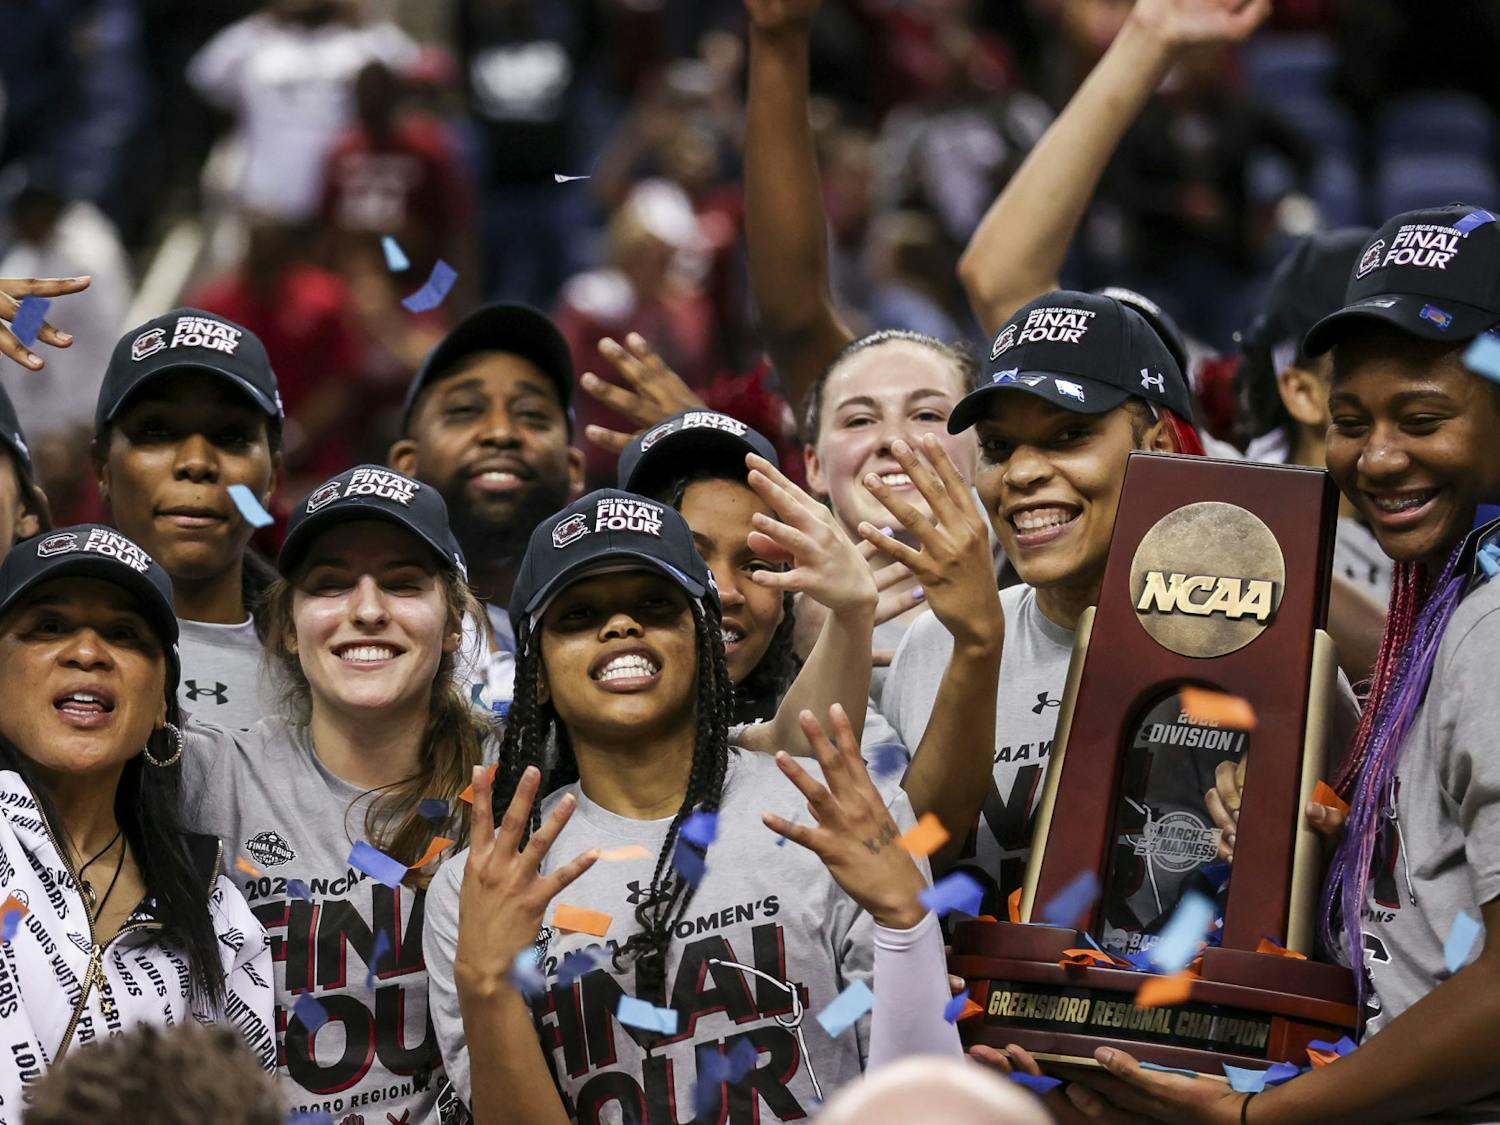 The South Carolina women's basketball team celebrates after the Gamecocks' 80-50 victory over Creighton in the Elite Eight on Sunday, March 27, 2022. The win propelled South Carolina to the Final Four.&nbsp;